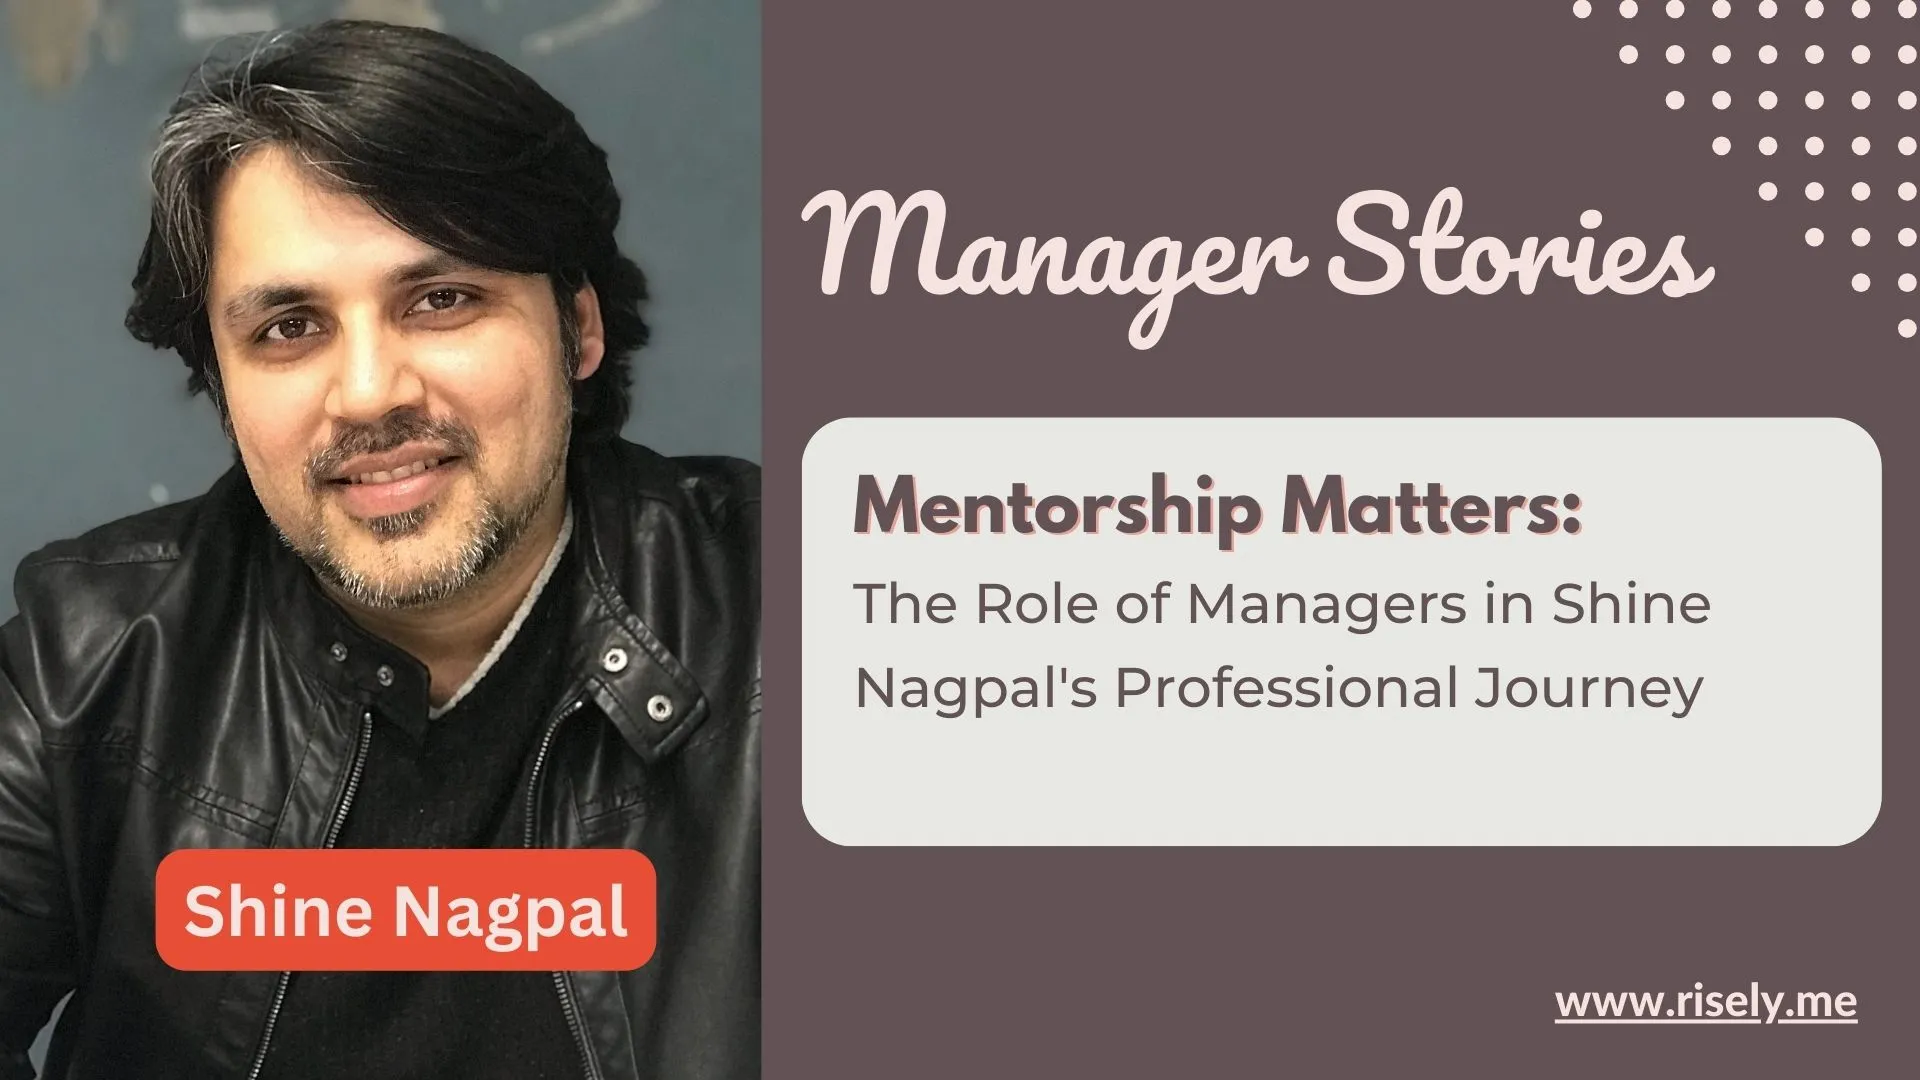 Mentorship Matters: The Role of Managers in Shine Nagpal’s Professional Journey